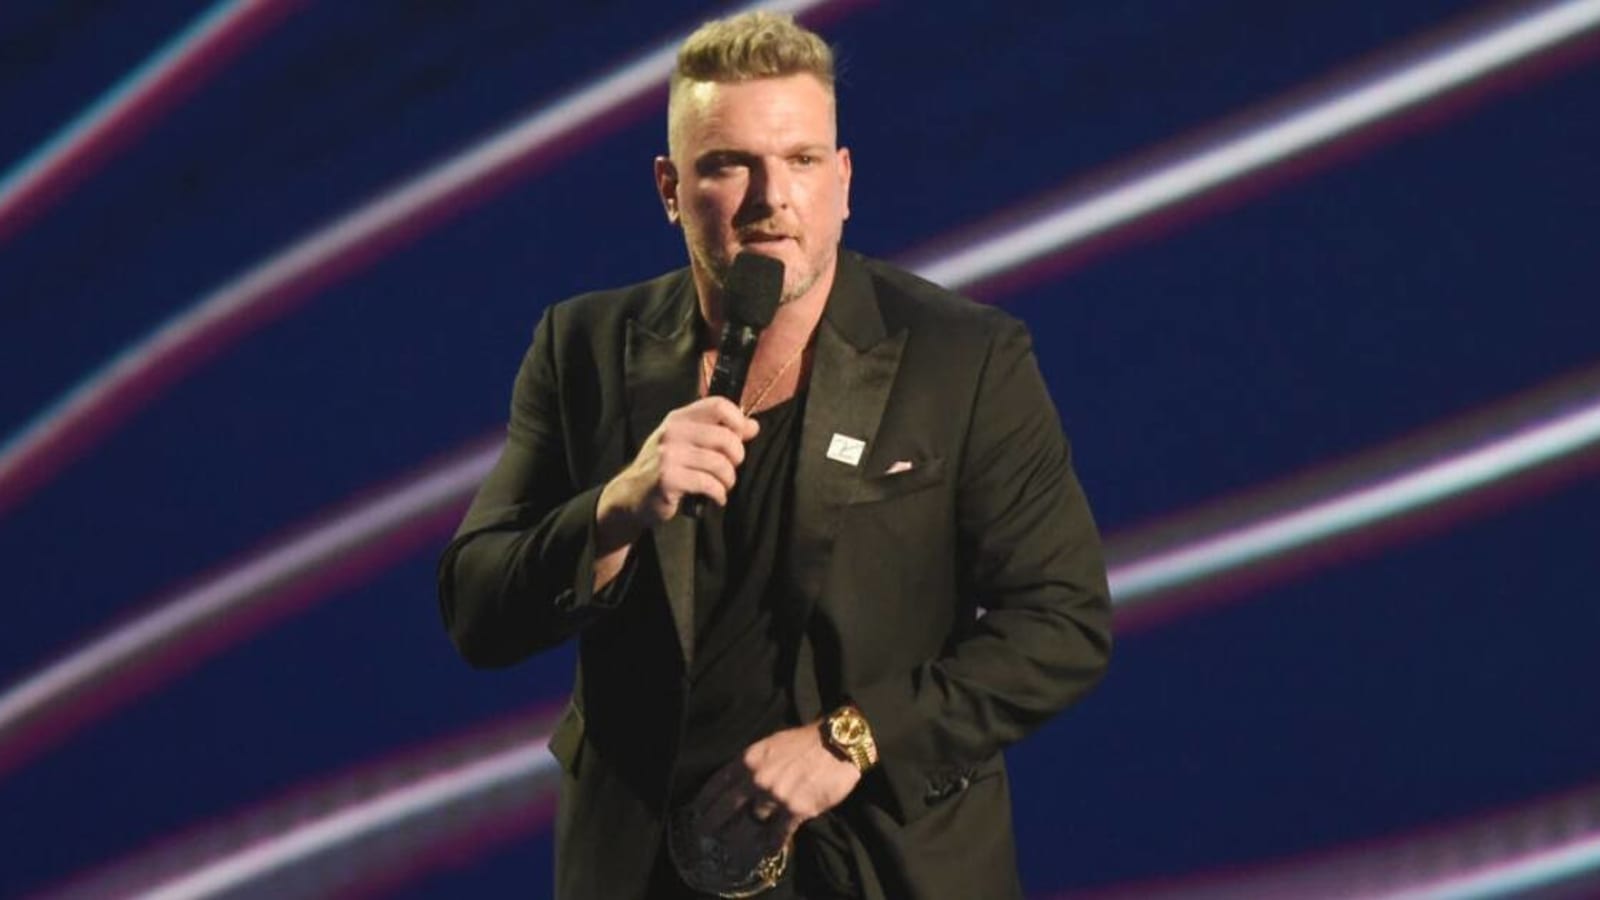 Pat McAfee delivers monologue at ESPYs, takes jab at Brett Favre